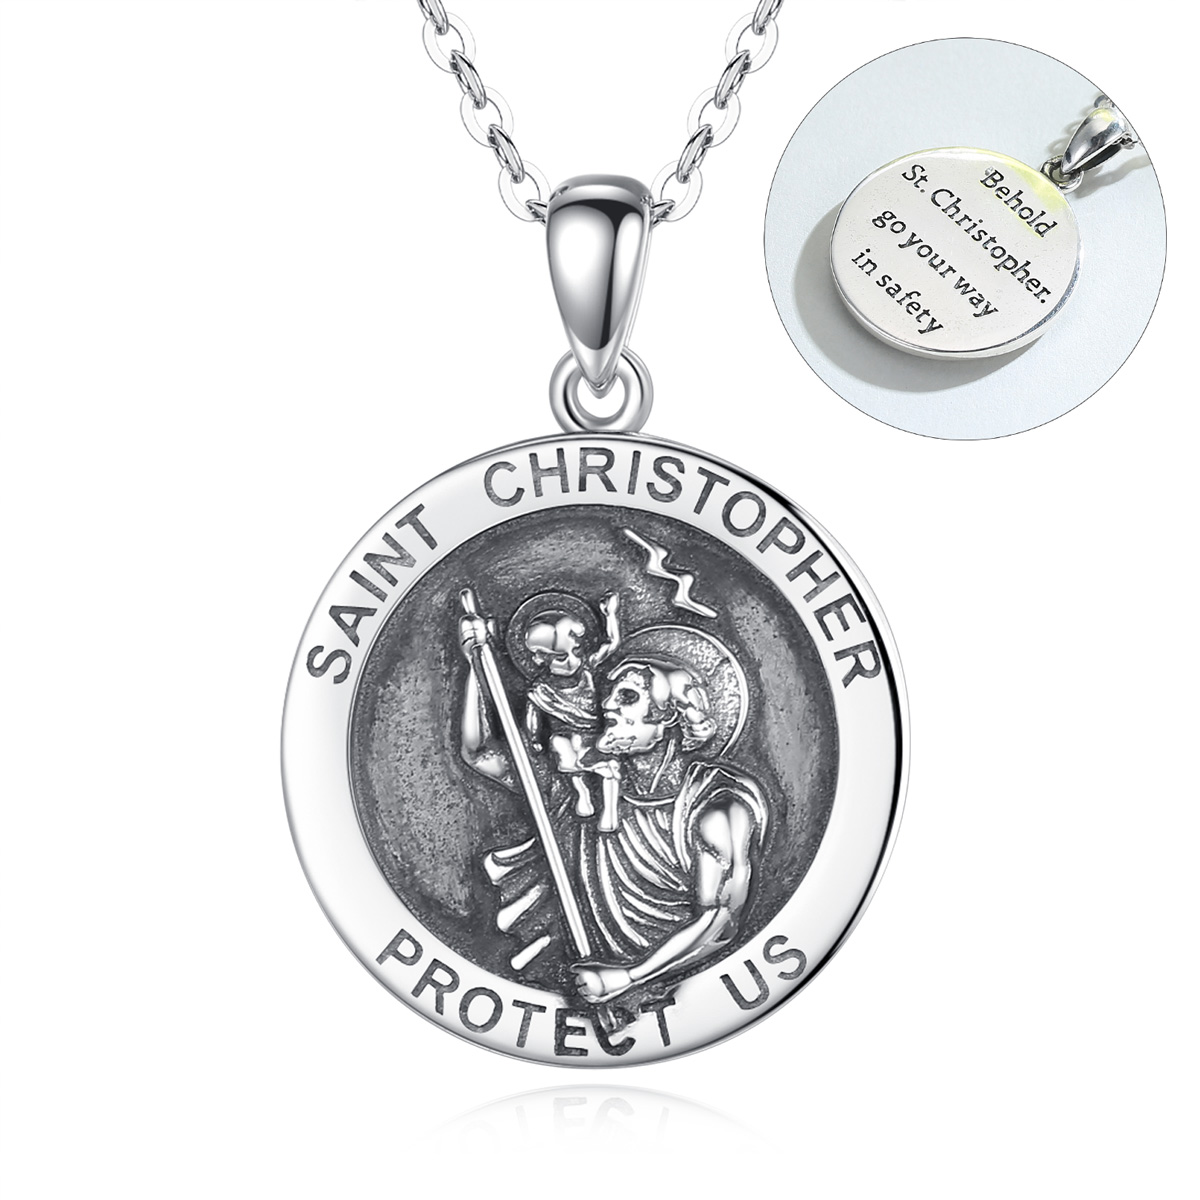 Merryshine Jewelry S925 Sterling Silver Vintage Oxidized Engravable Text Saint Christopher Necklace